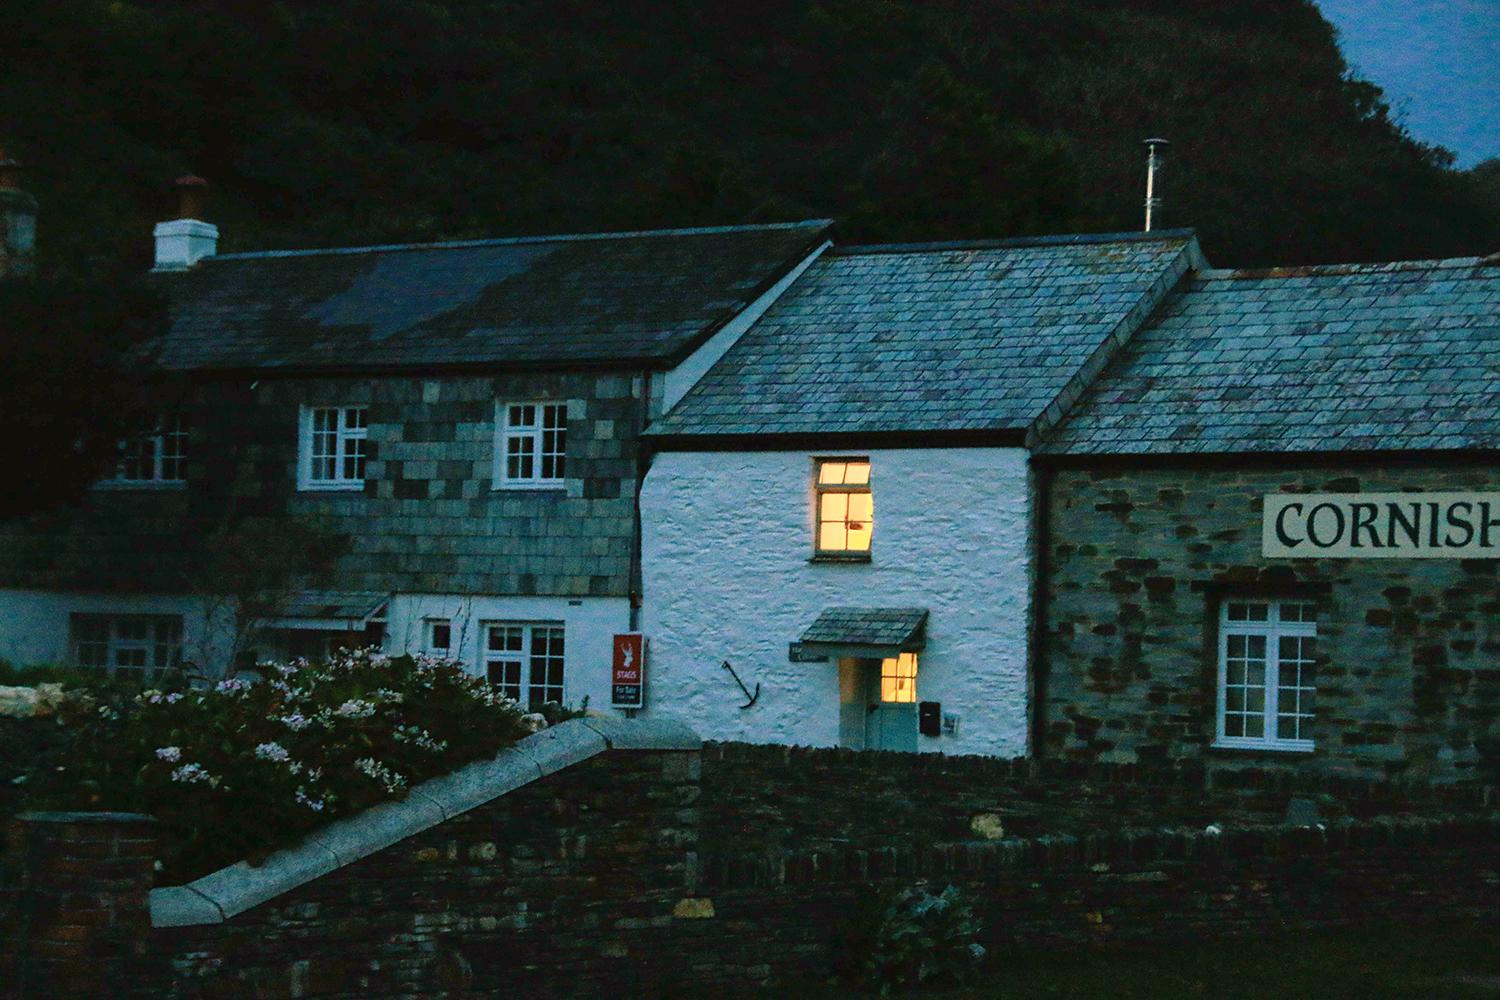 Places to stay: Beach Retreats’ Harbourside Cottage, Boscastle